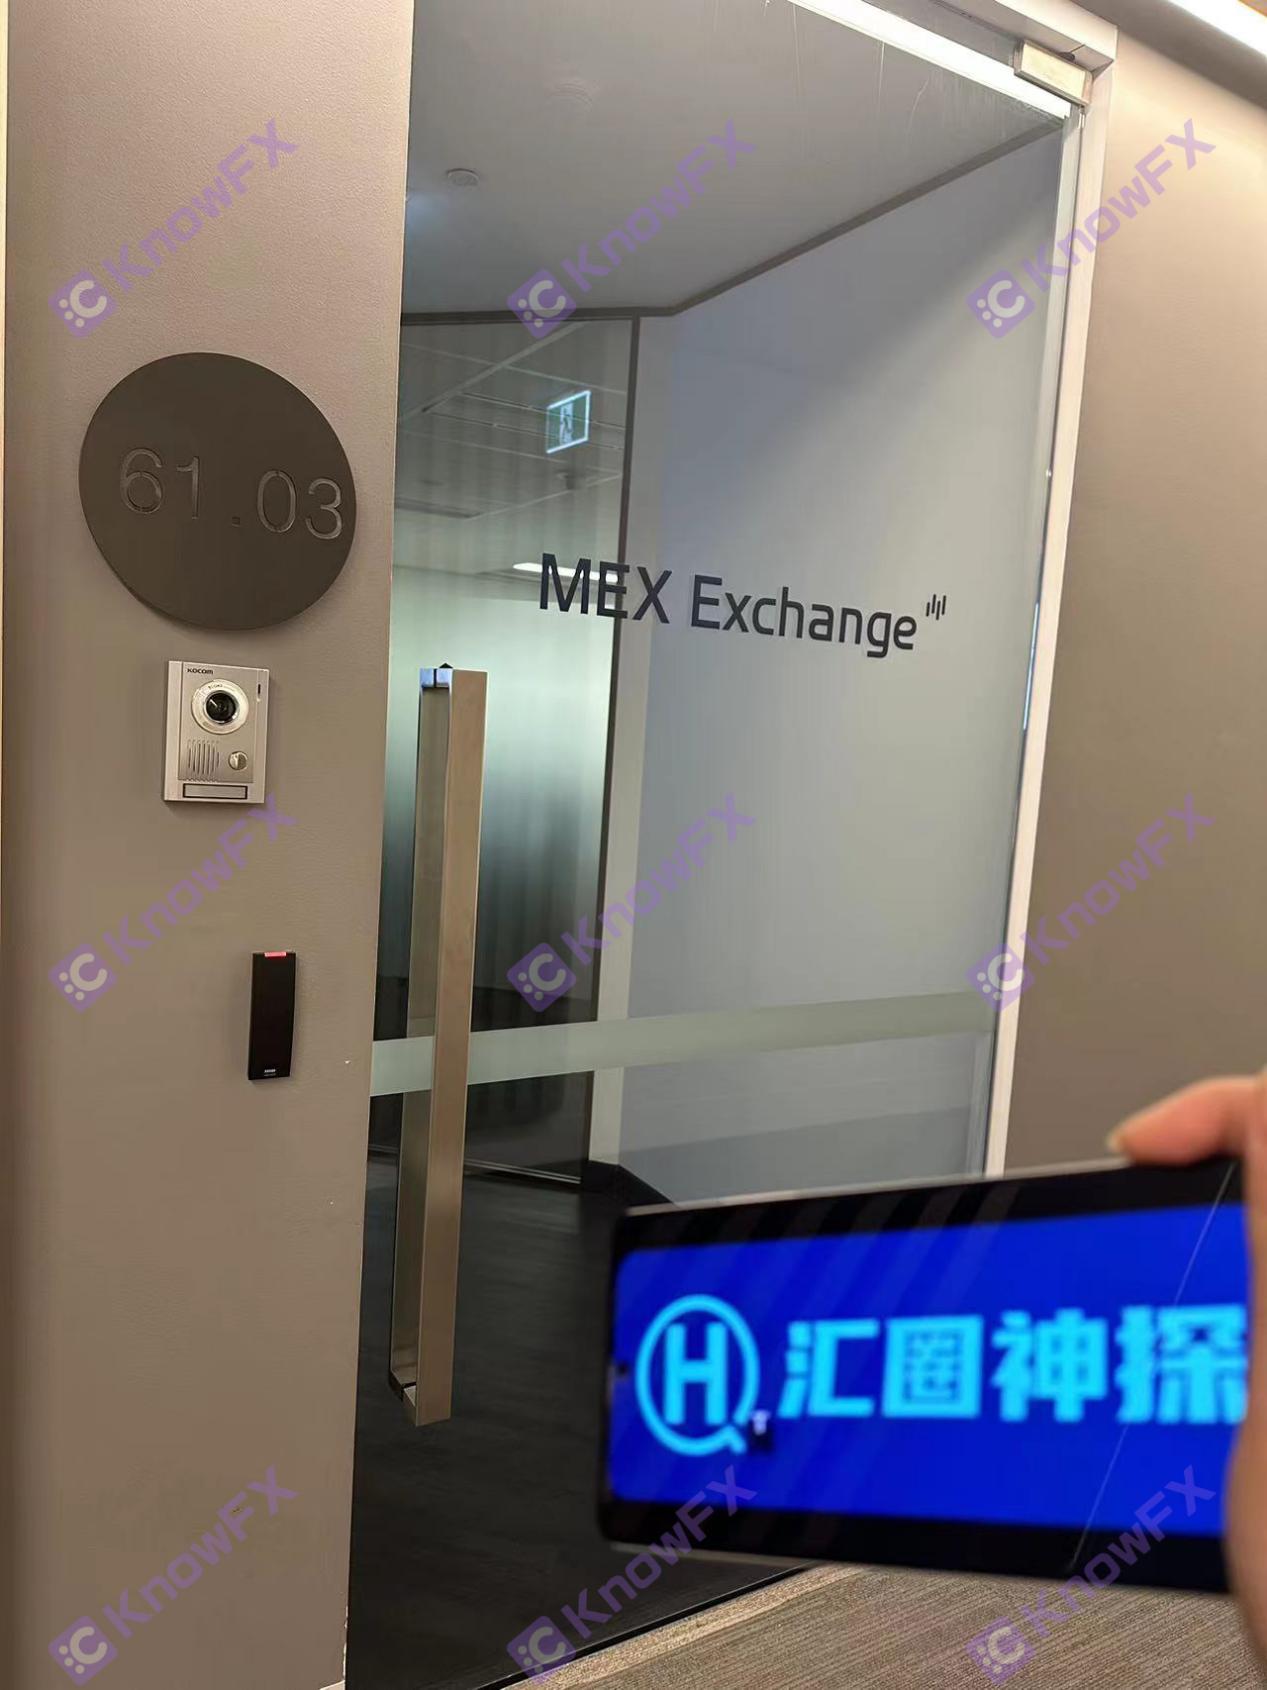 Forex securities firms Multibank Group Datong Financial Group uses a registered company to pretend to be a foreign exchange transaction!Self -developed app dipped in MT4, 5-第3张图片-要懂汇圈网